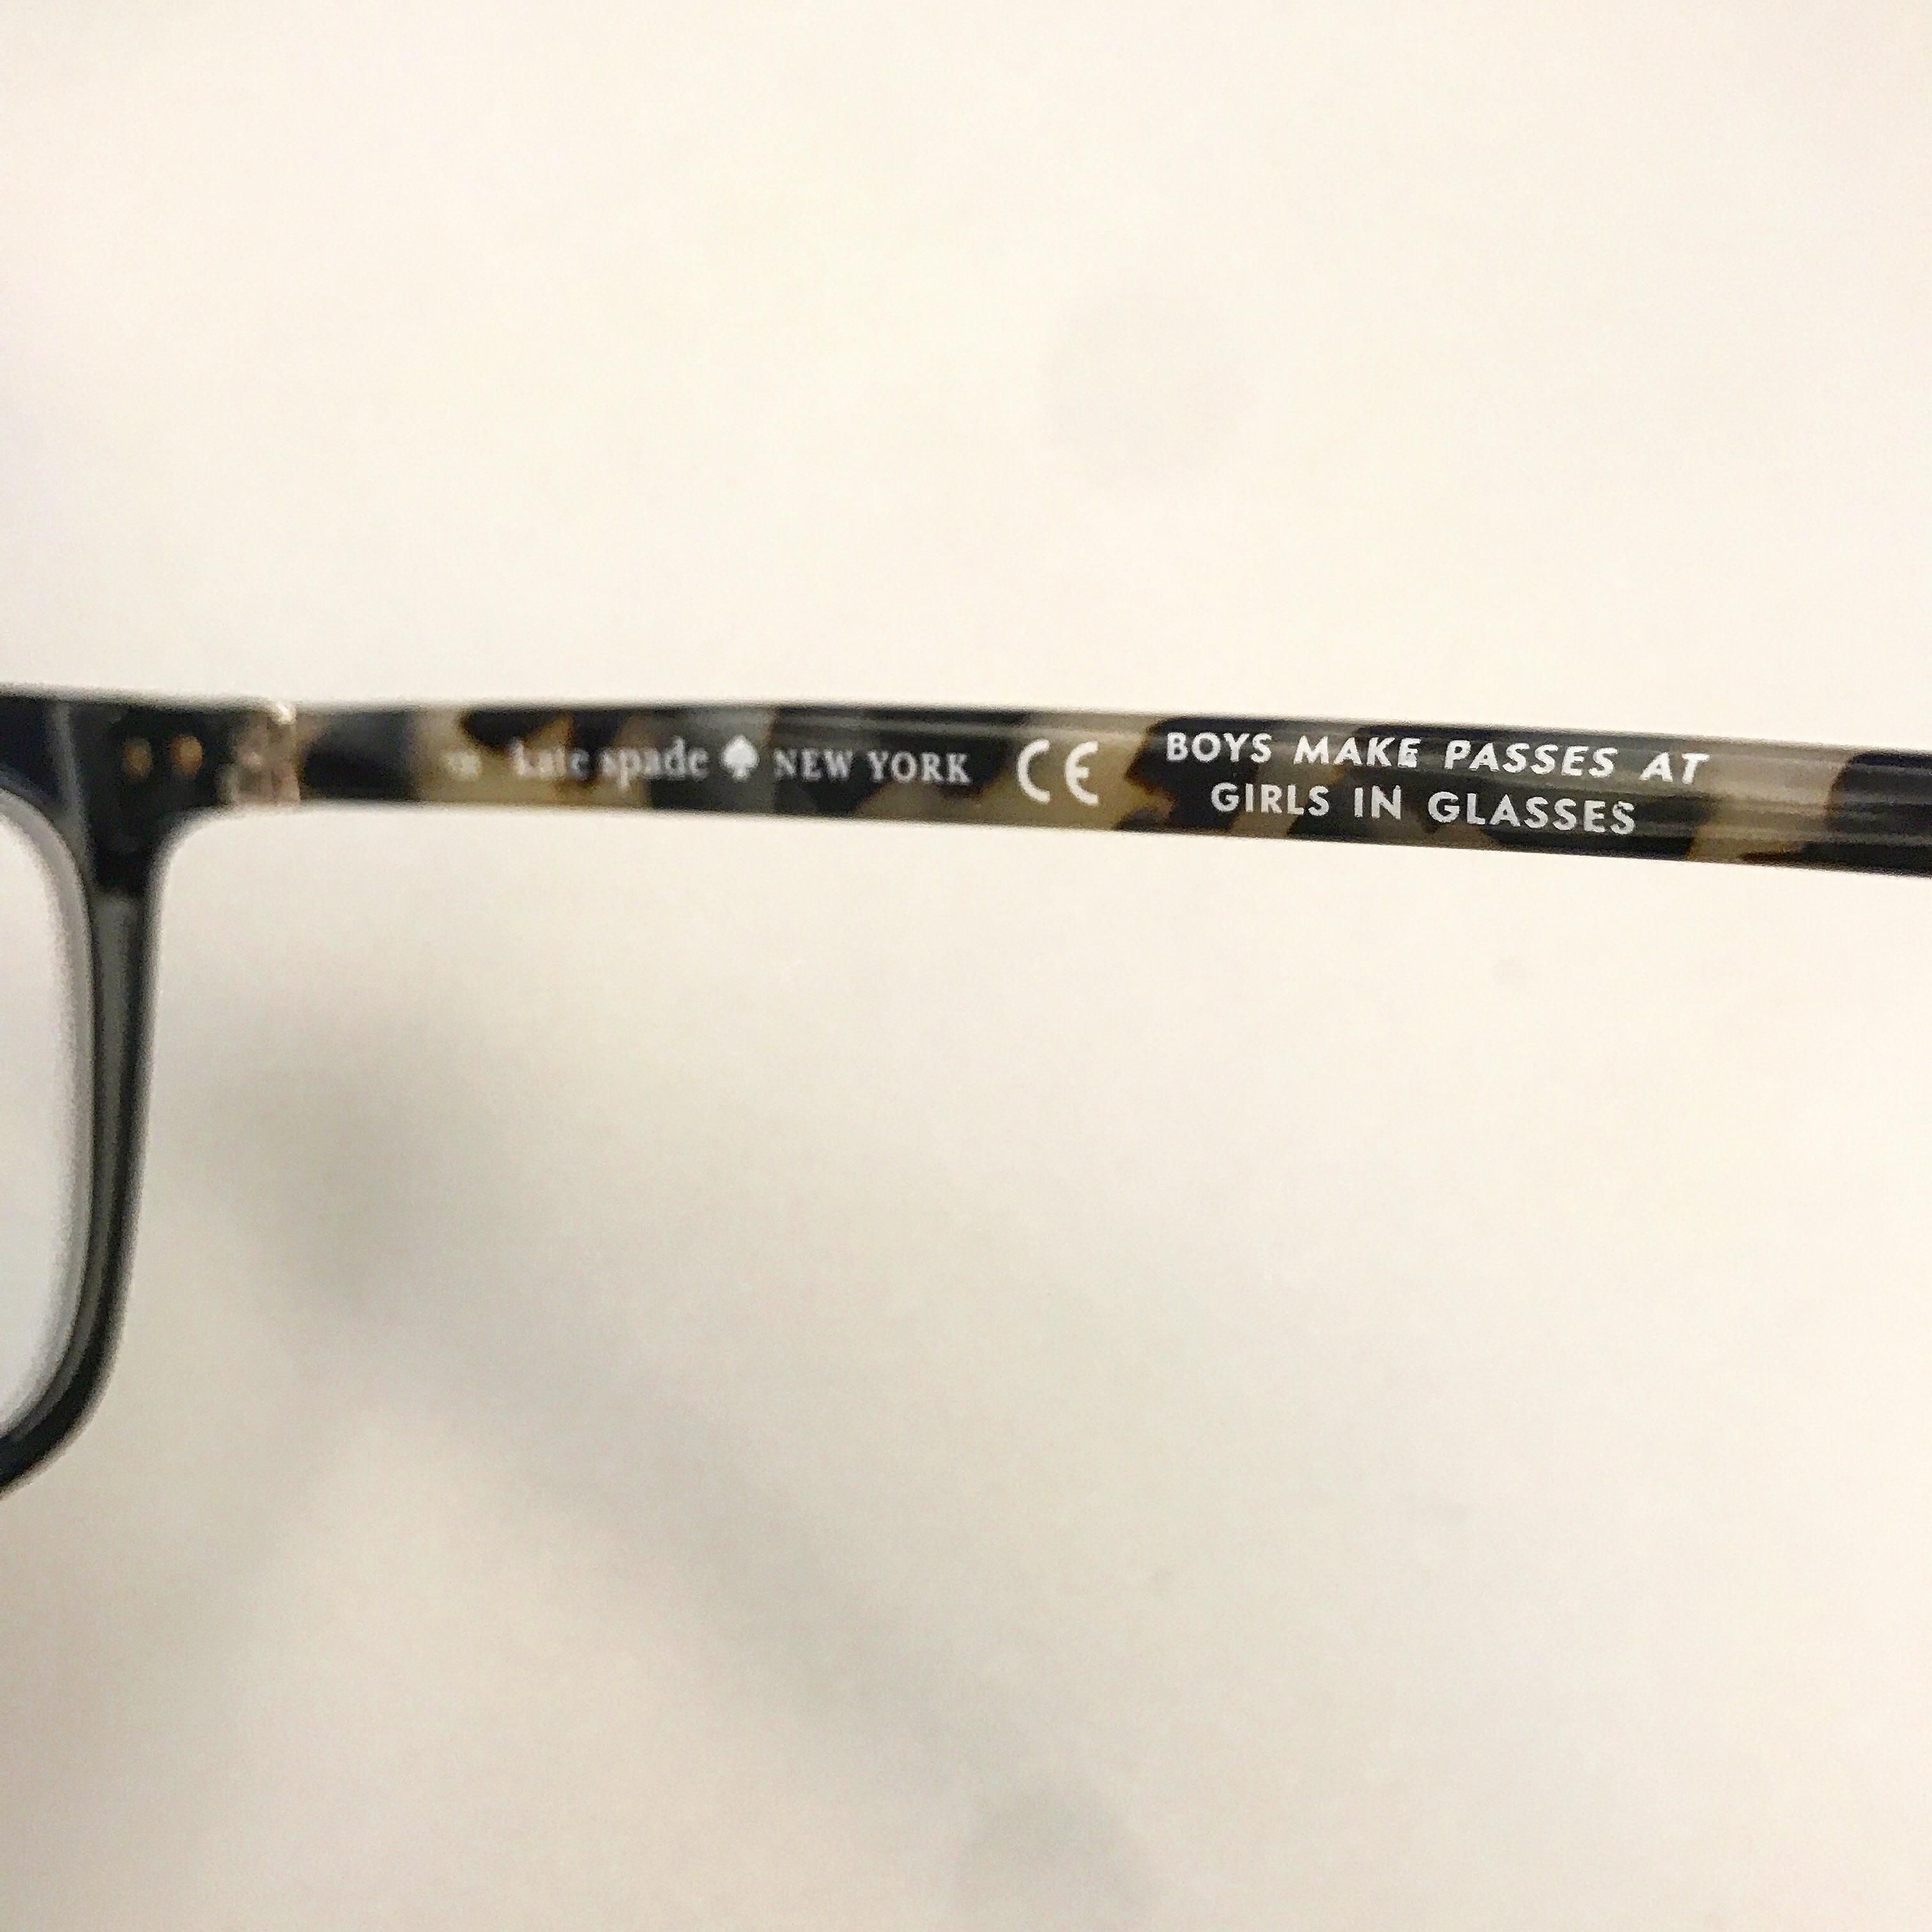 My new glasses have a cute little message.